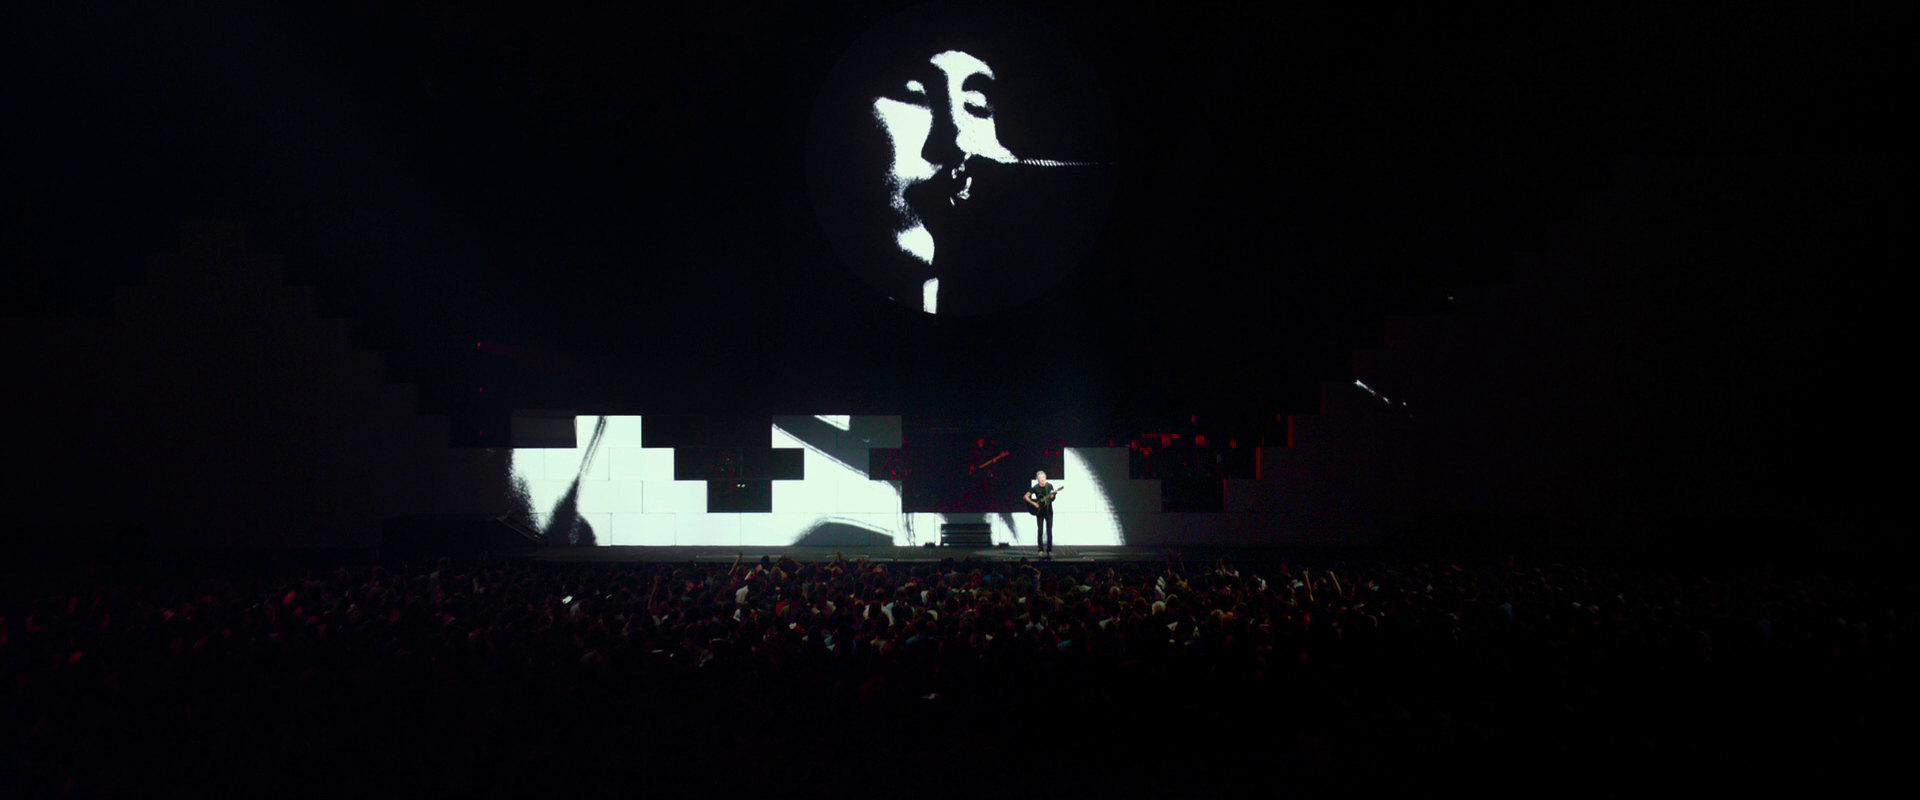 ǽ Roger.Waters.the.Wall.2014.1080p.BluRay.x264.DTS-WiKi 11.12GB-7.png